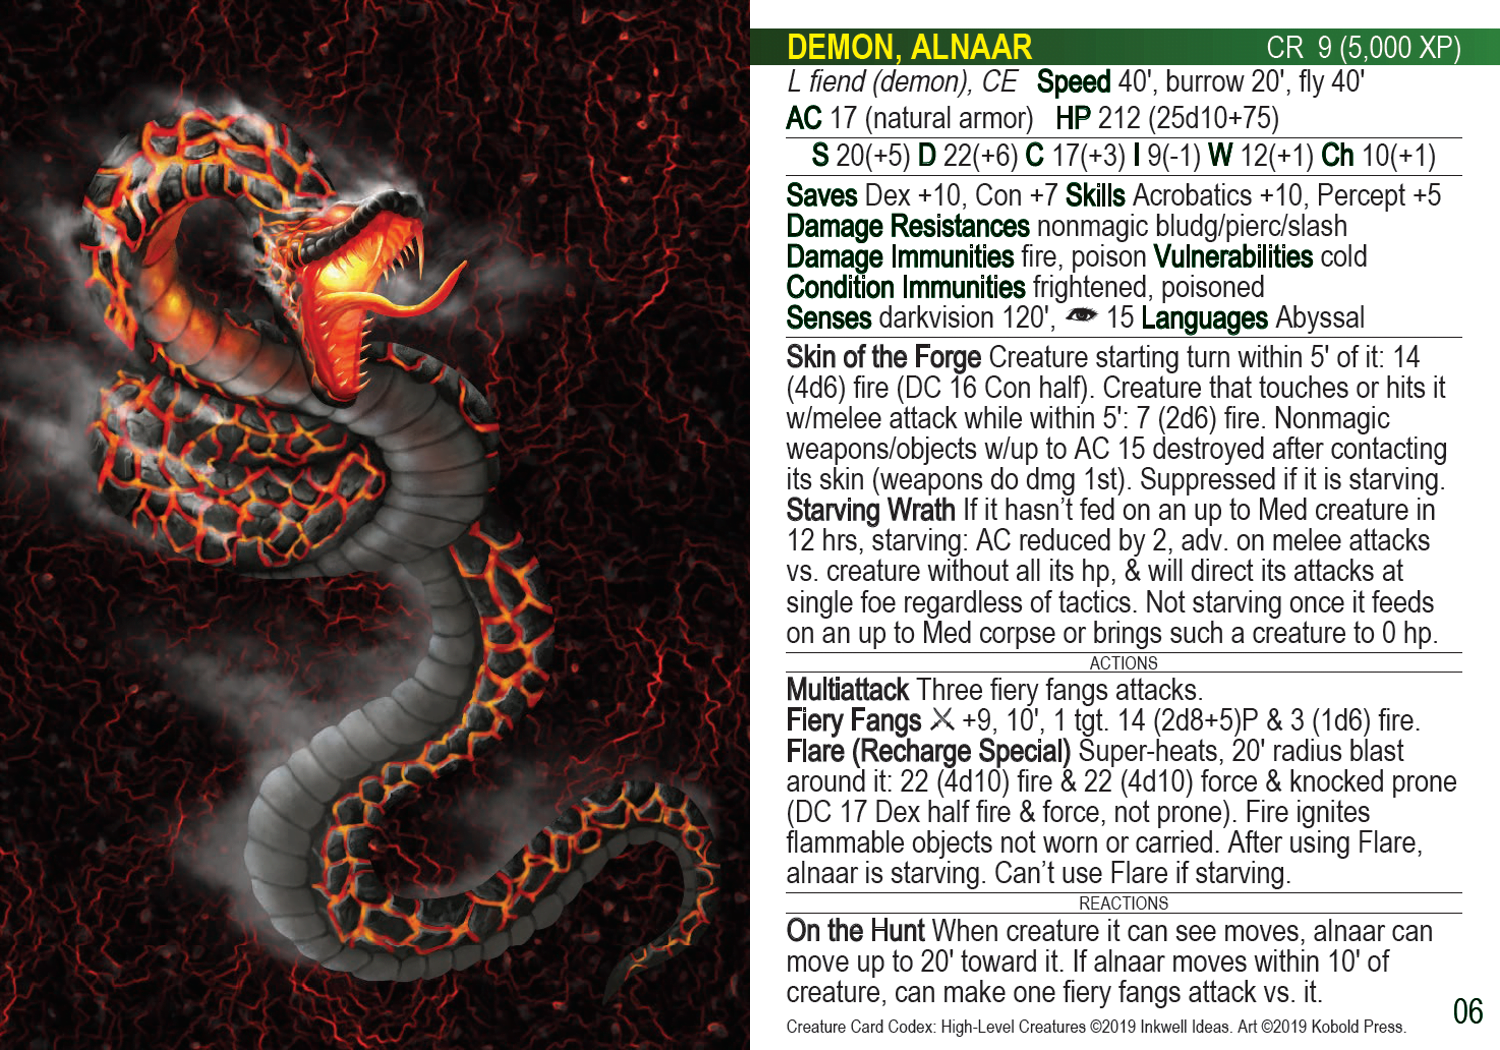 Cover-to-Cover Awesome Inside Creature Codex from Kobold Press